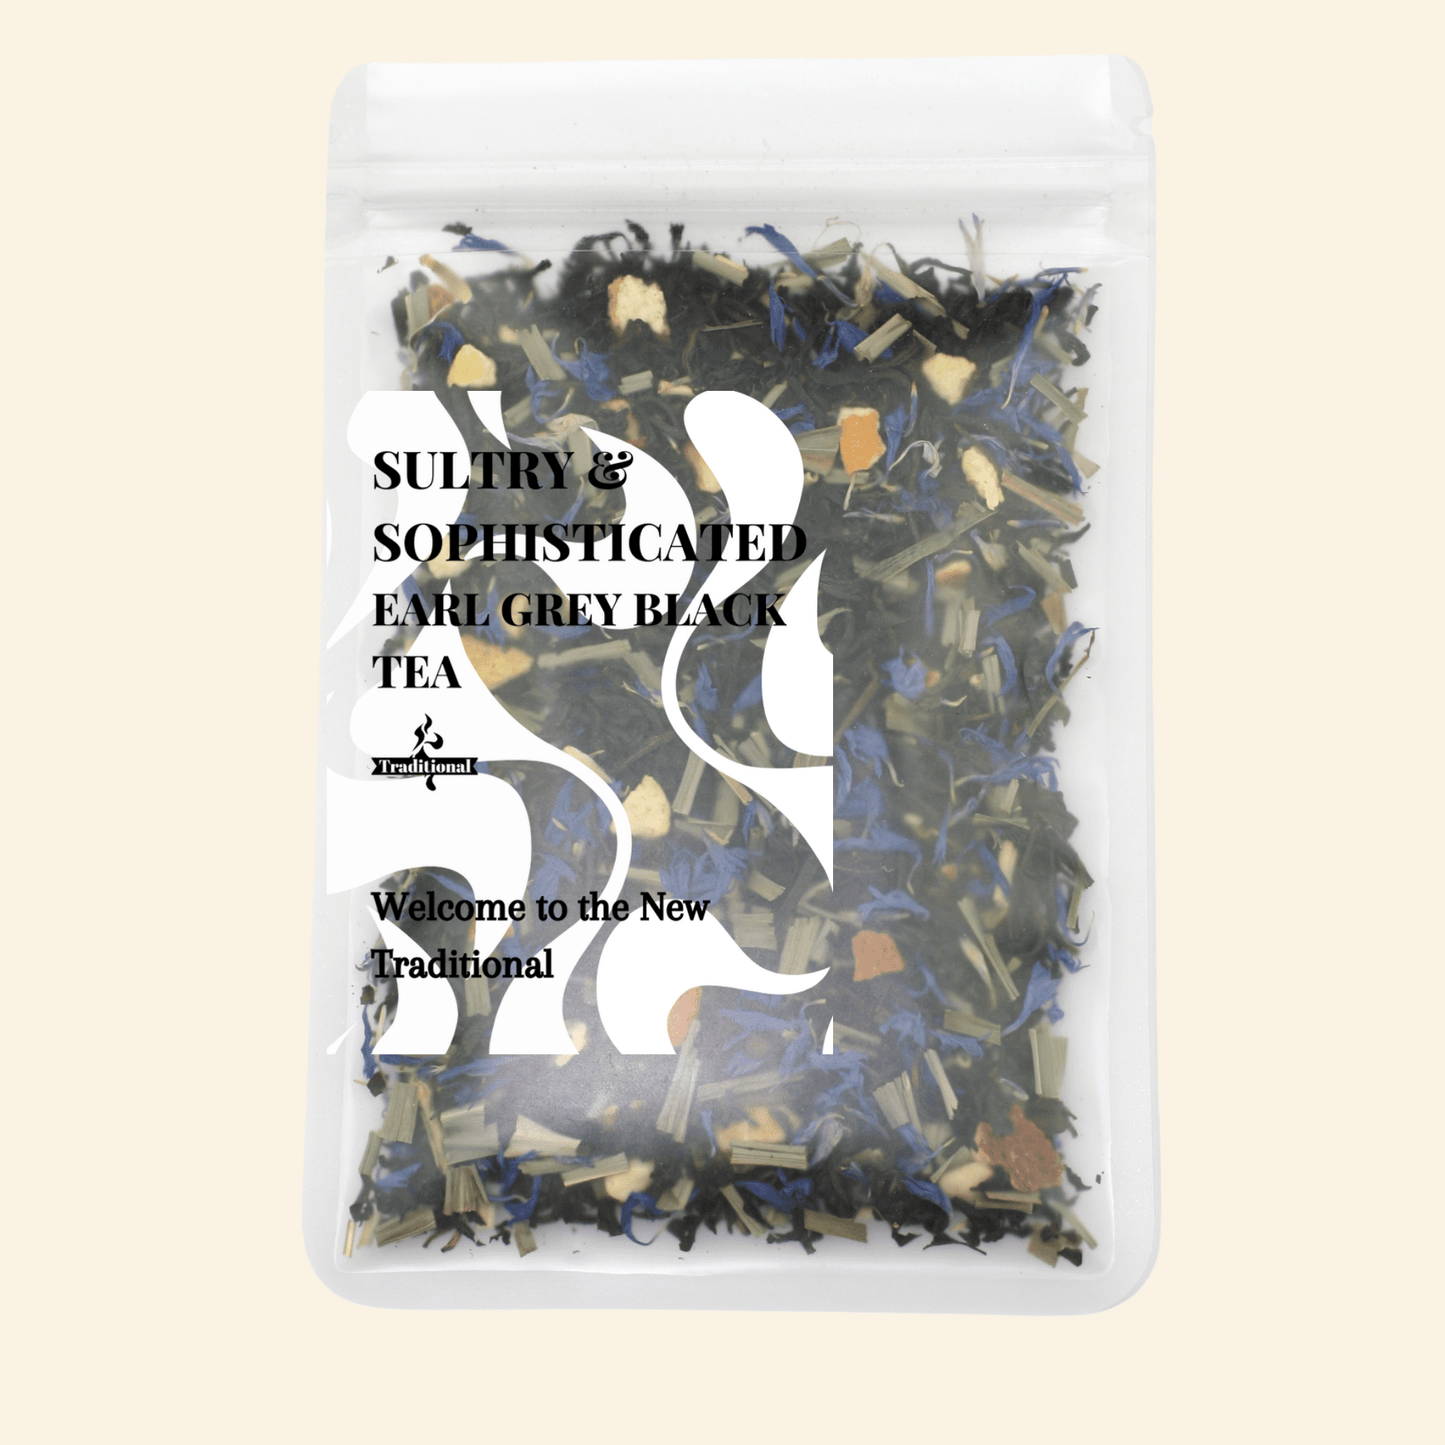 Sultry & Sophisticated. Earl Grey Black Tea